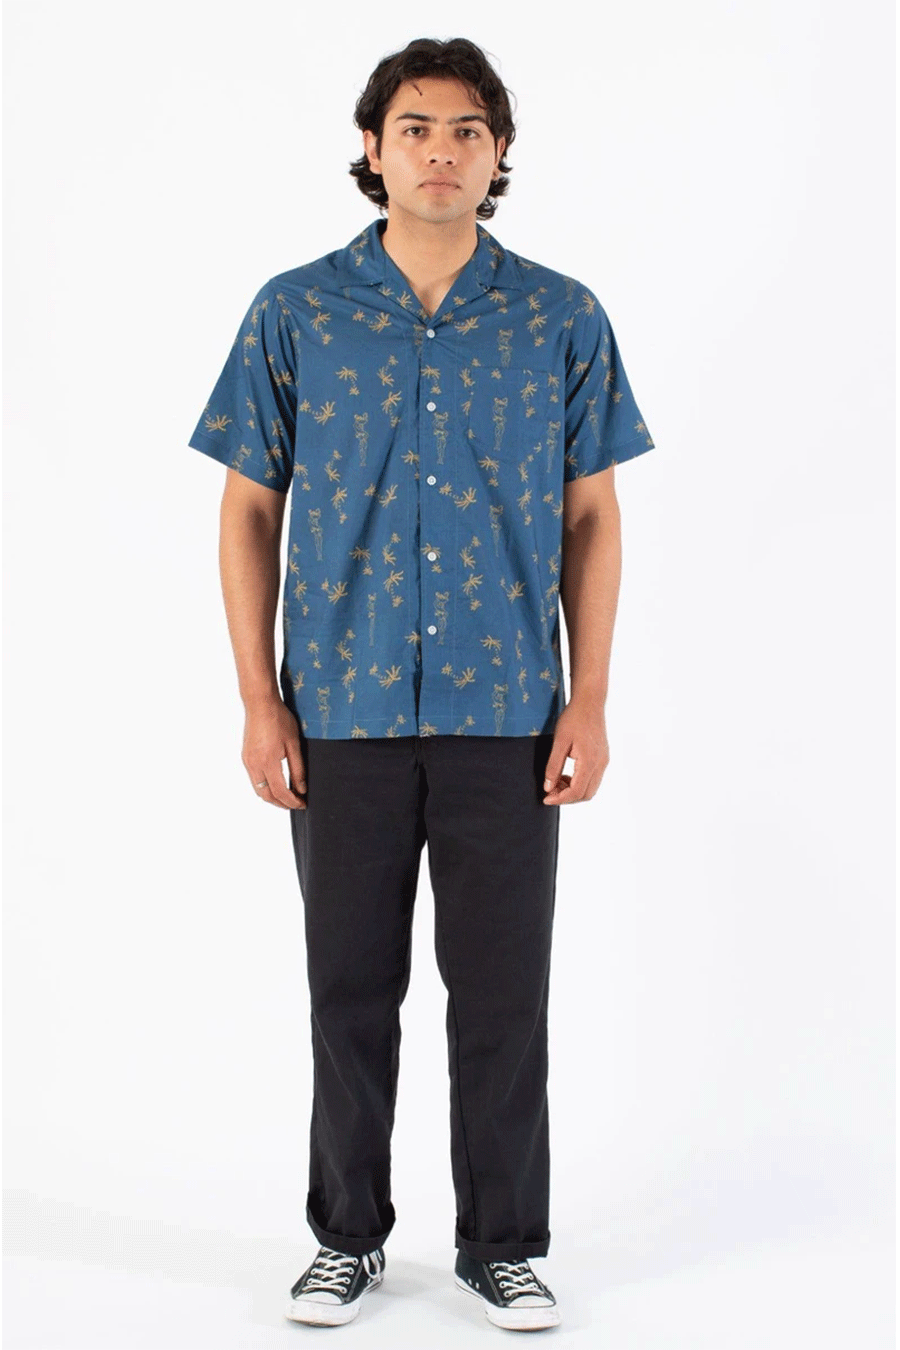 Siren Button Up | Navy - Main Image Number 1 of 1